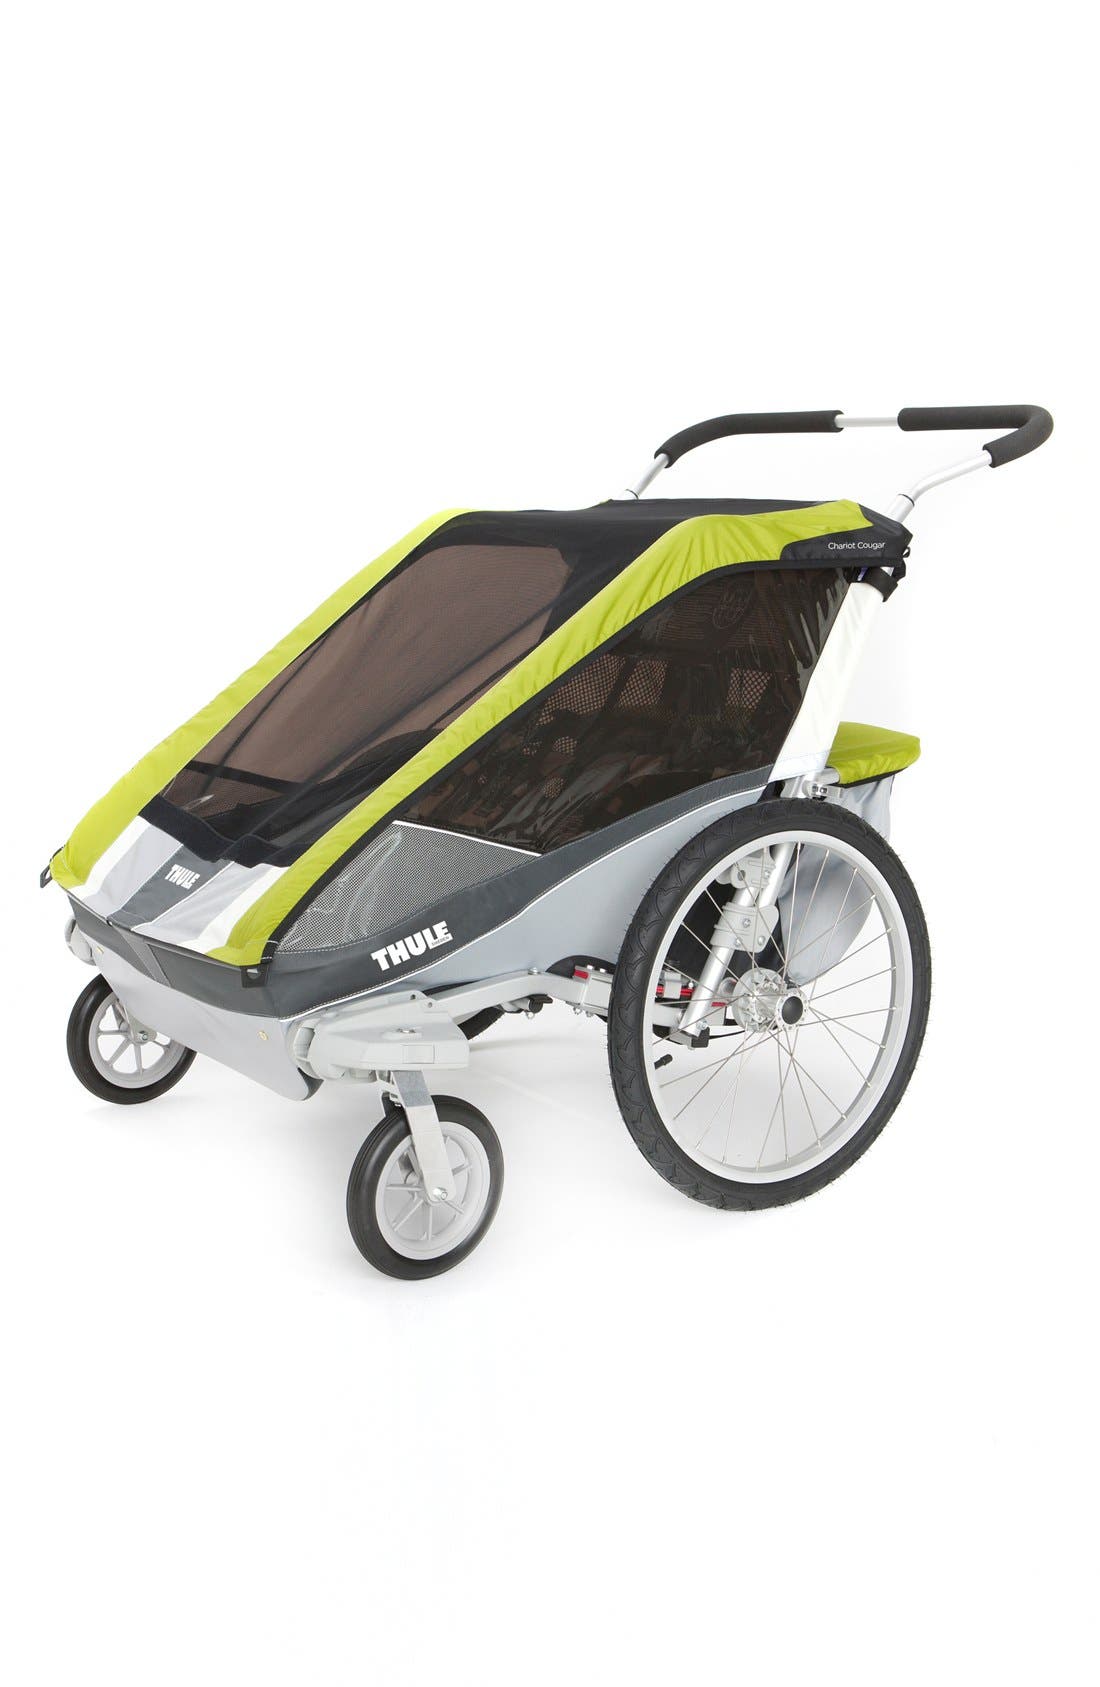 thule chariot cougar double stroller